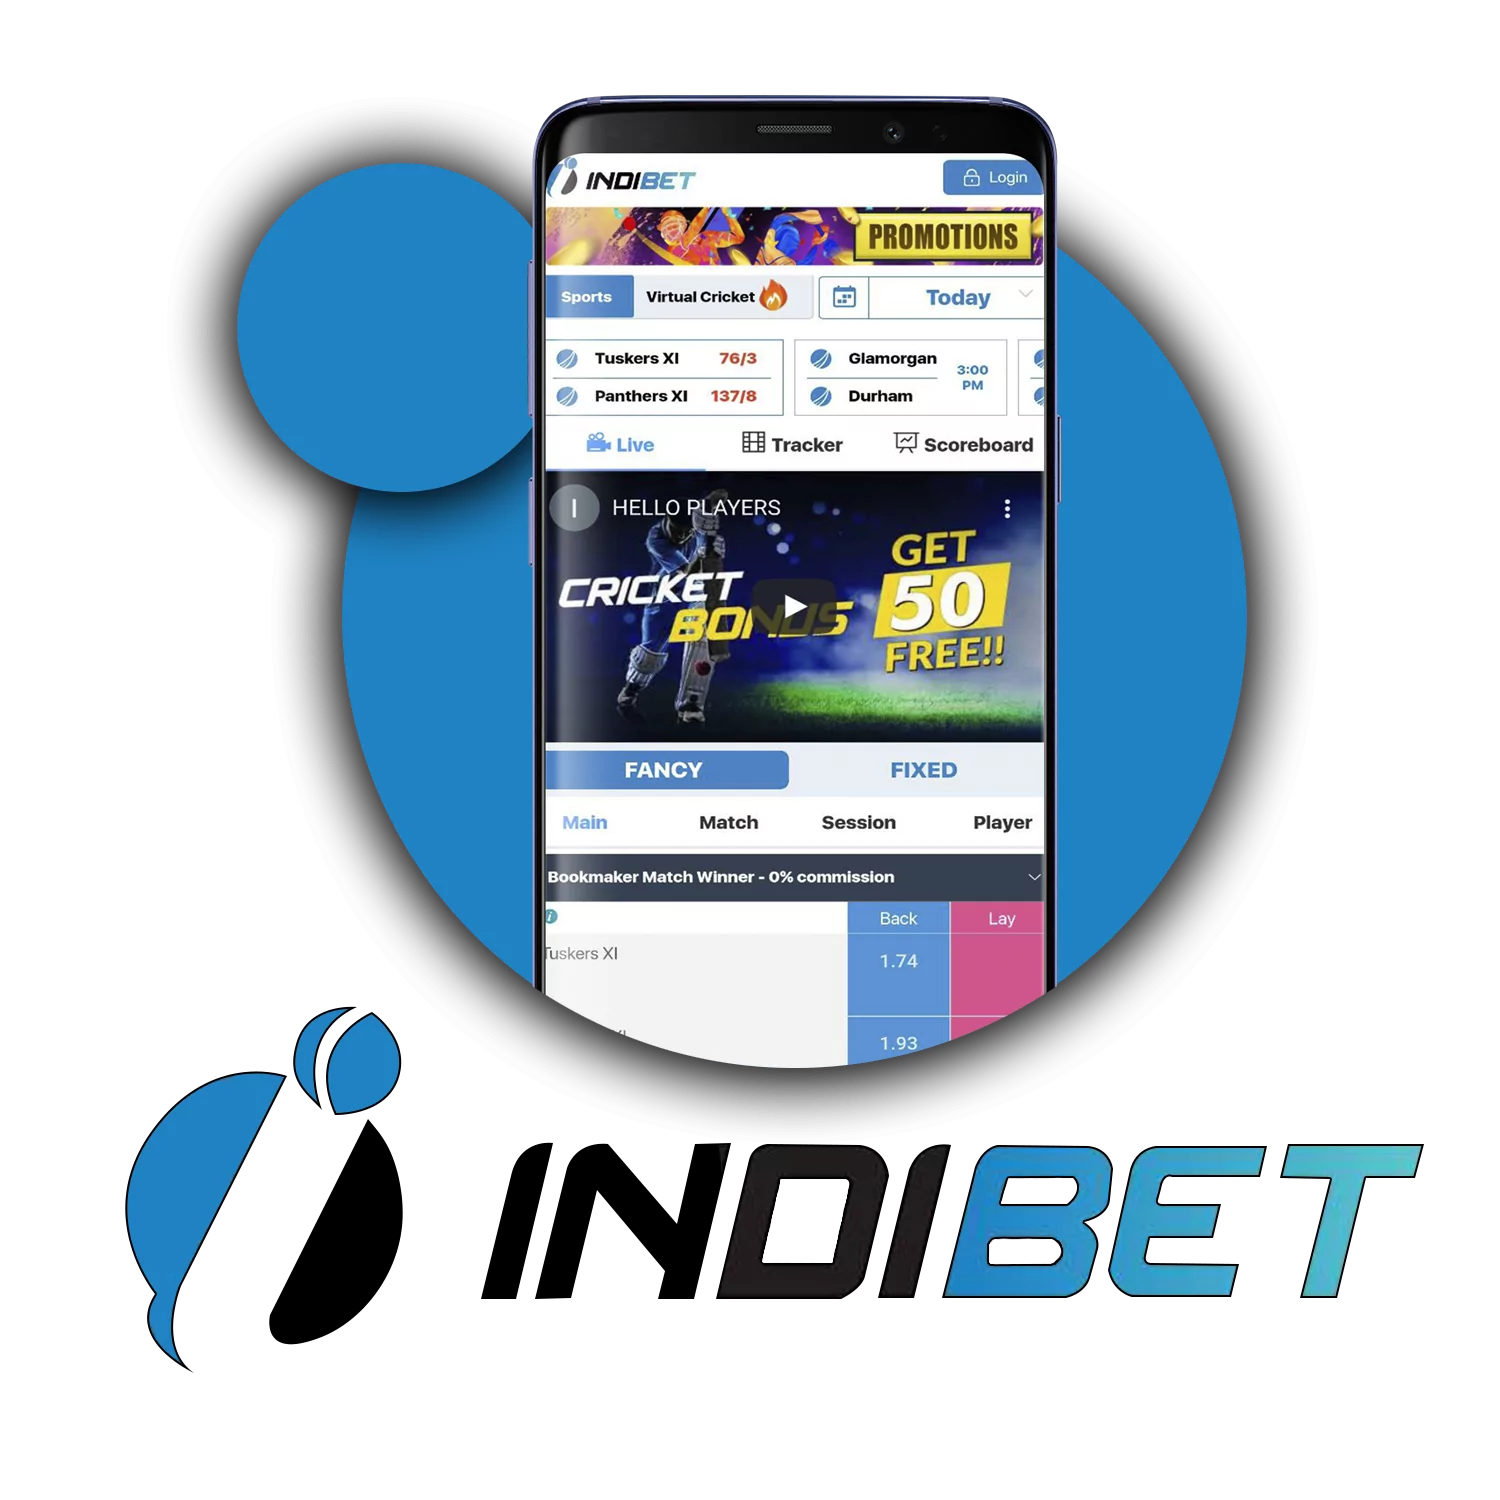 Download and install the Indibet mobile app for betting.